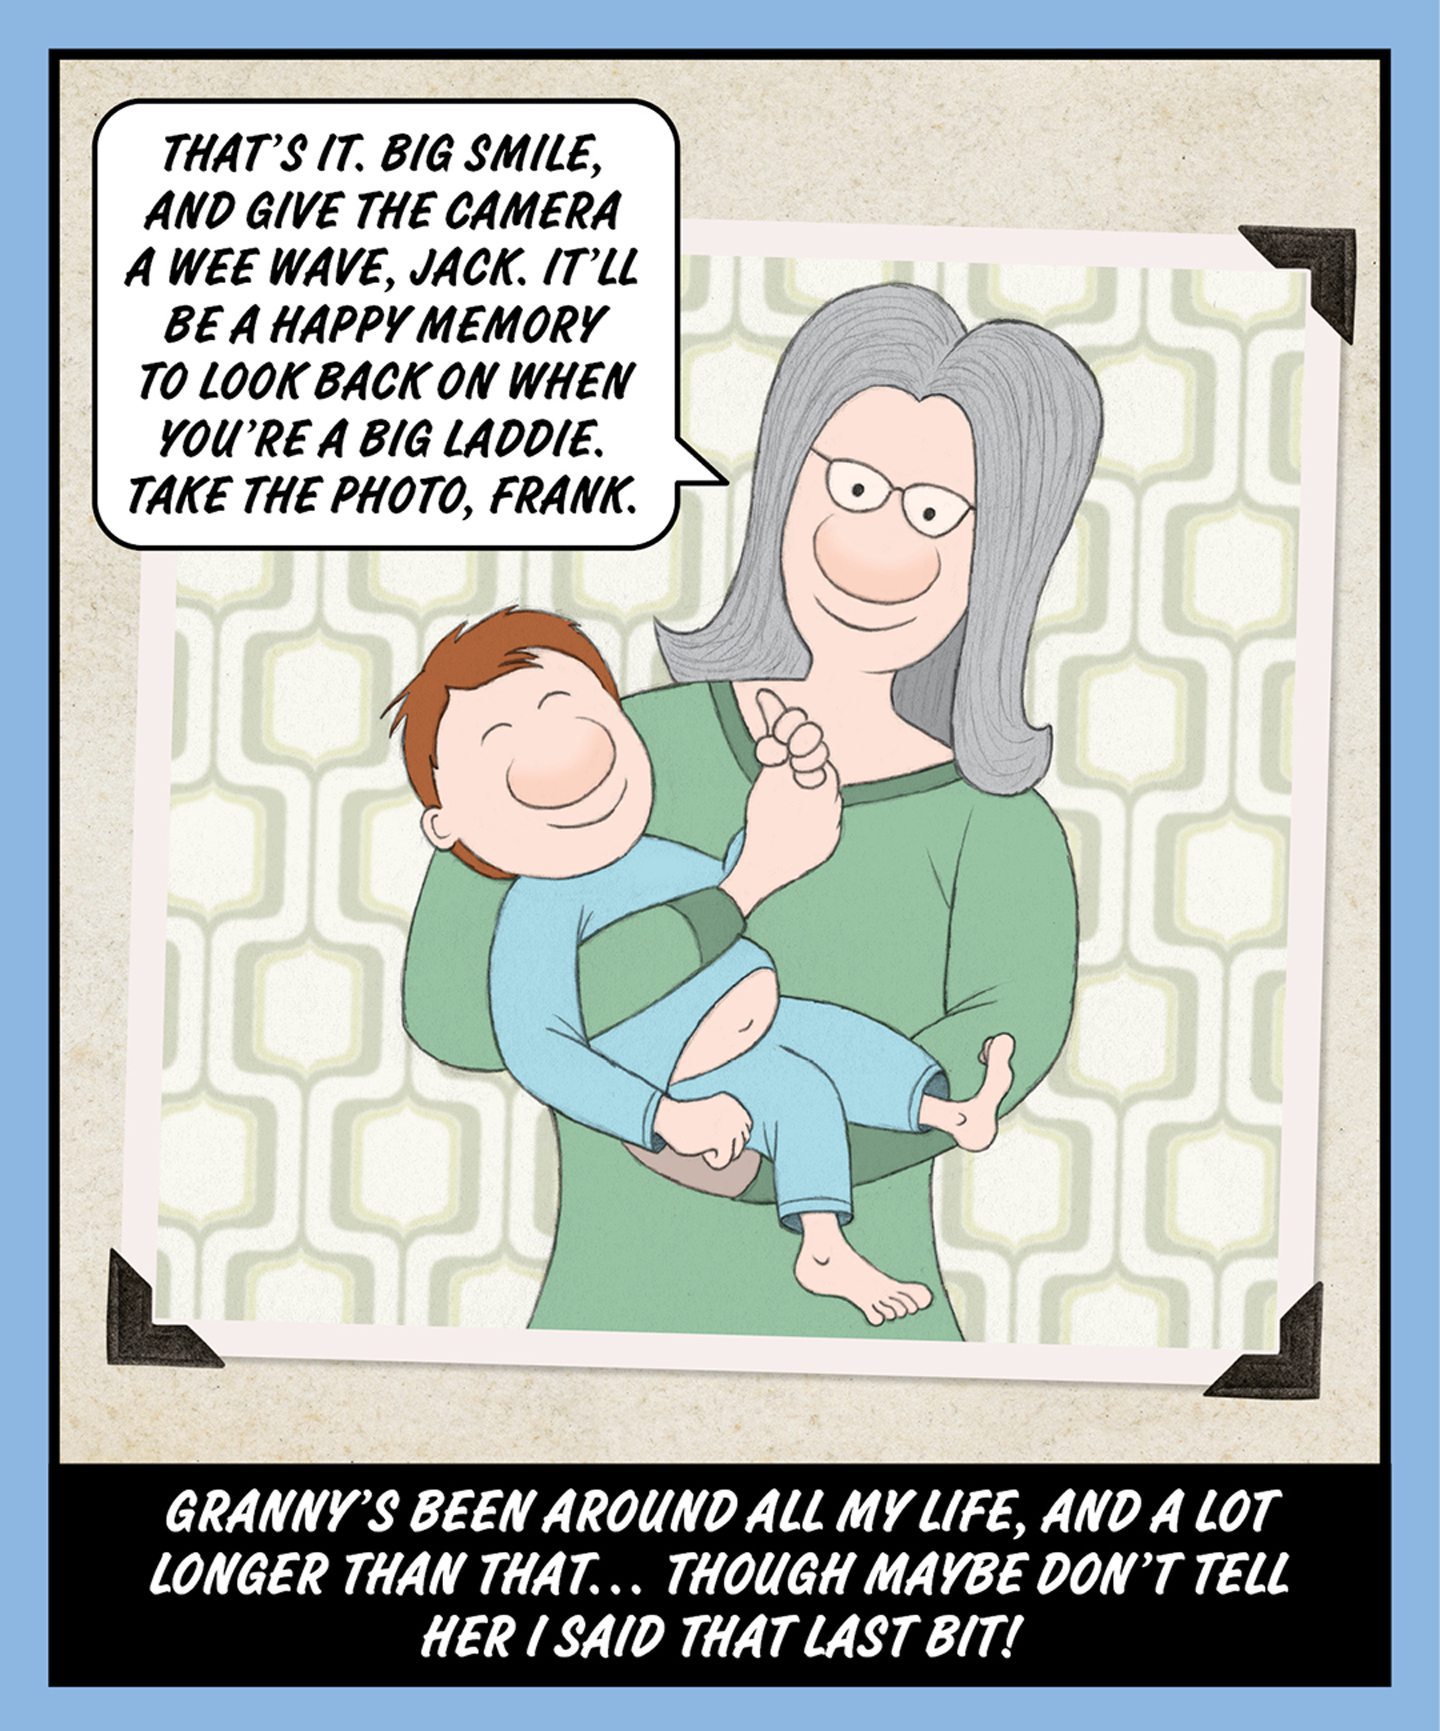 A comic illustration of a granny holding a young baby. The words in a speech bubble read: THAT'S IT. BIG SMILE, AND GIVE THE CAMERA A WEE WAVE, JACK. IT'LL BE A HAPPY MEMORY TO LOOK BACK ON WHEN YOU'RE A BIG LADDIE. TAKE THE PHOTO, FRANK. And the words below the image read: GRANNY'S BEEN AROUND ALL MY LIFE, AND A LOT LONGER THAN THAT… THOUGH MAYBE DON'T TELL HER I SAID THAT LAST BIT!  